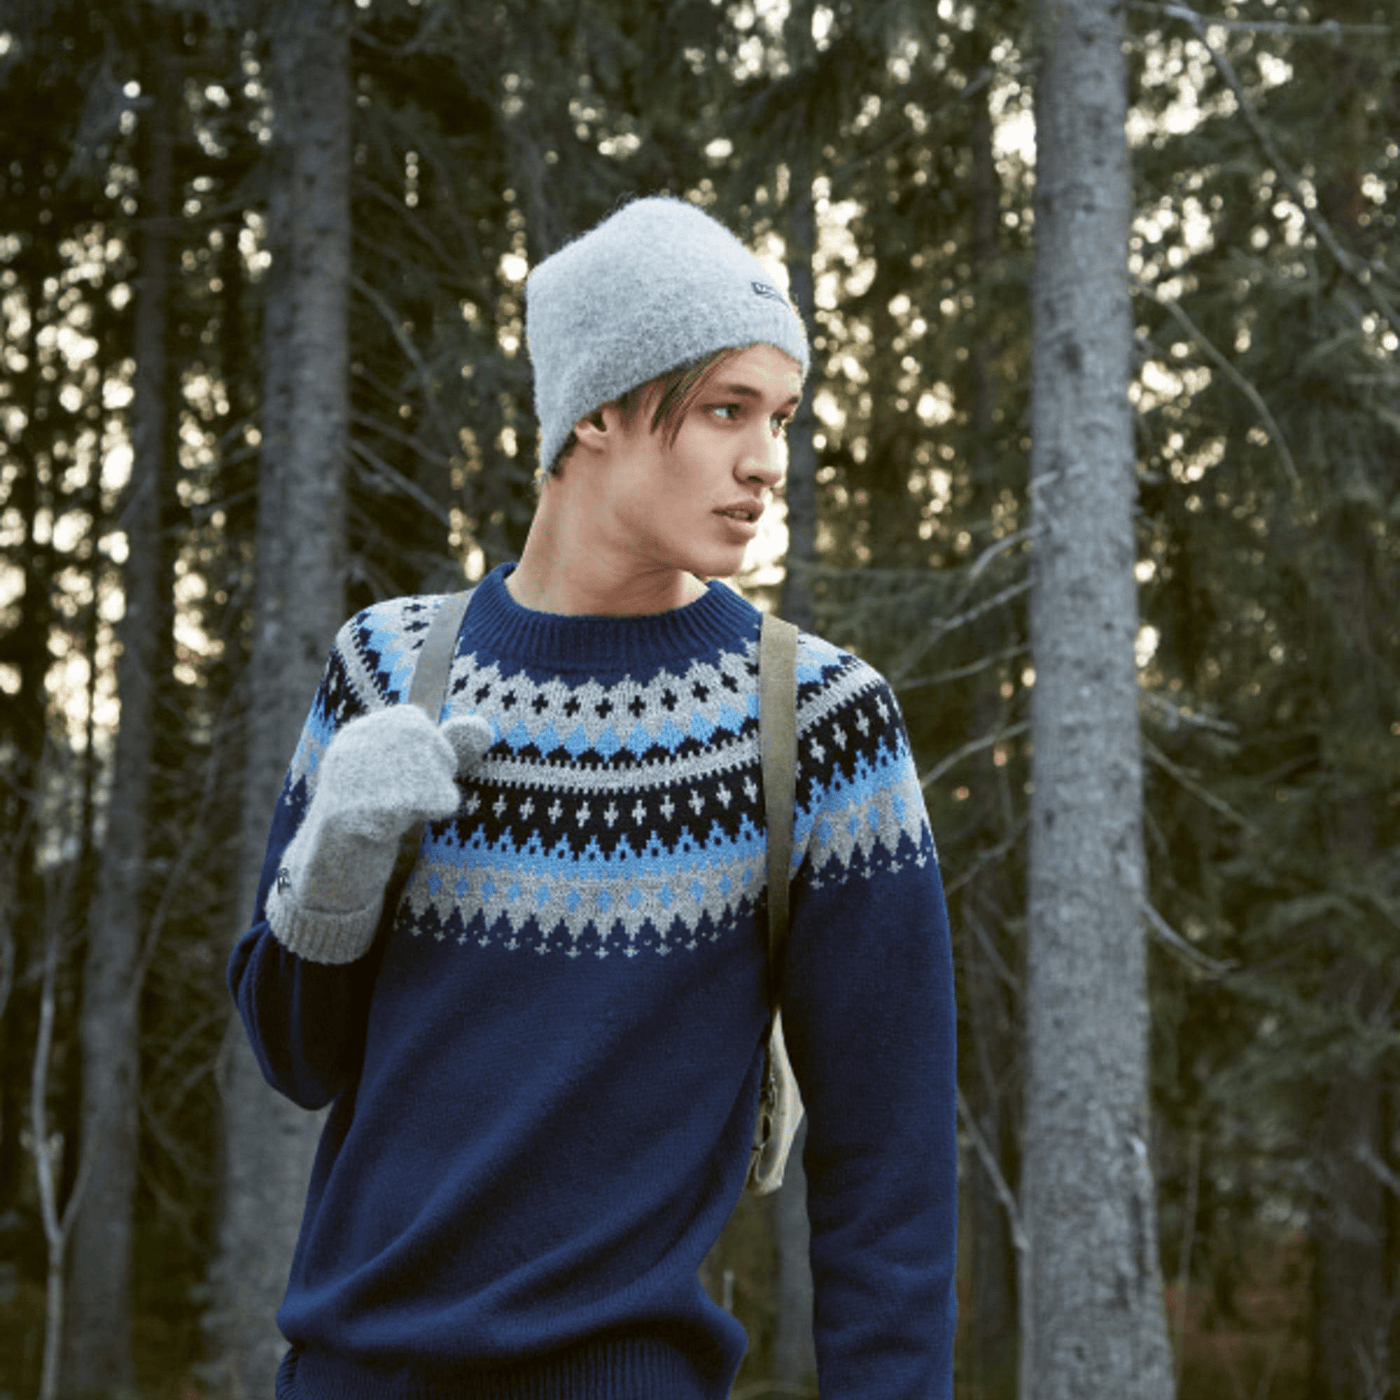 Man wearing knitted blue and grey patterned sweater and knitted grey hat and gloves from Rauma Finullgarn Varde pattern book from the Woolly Thistle